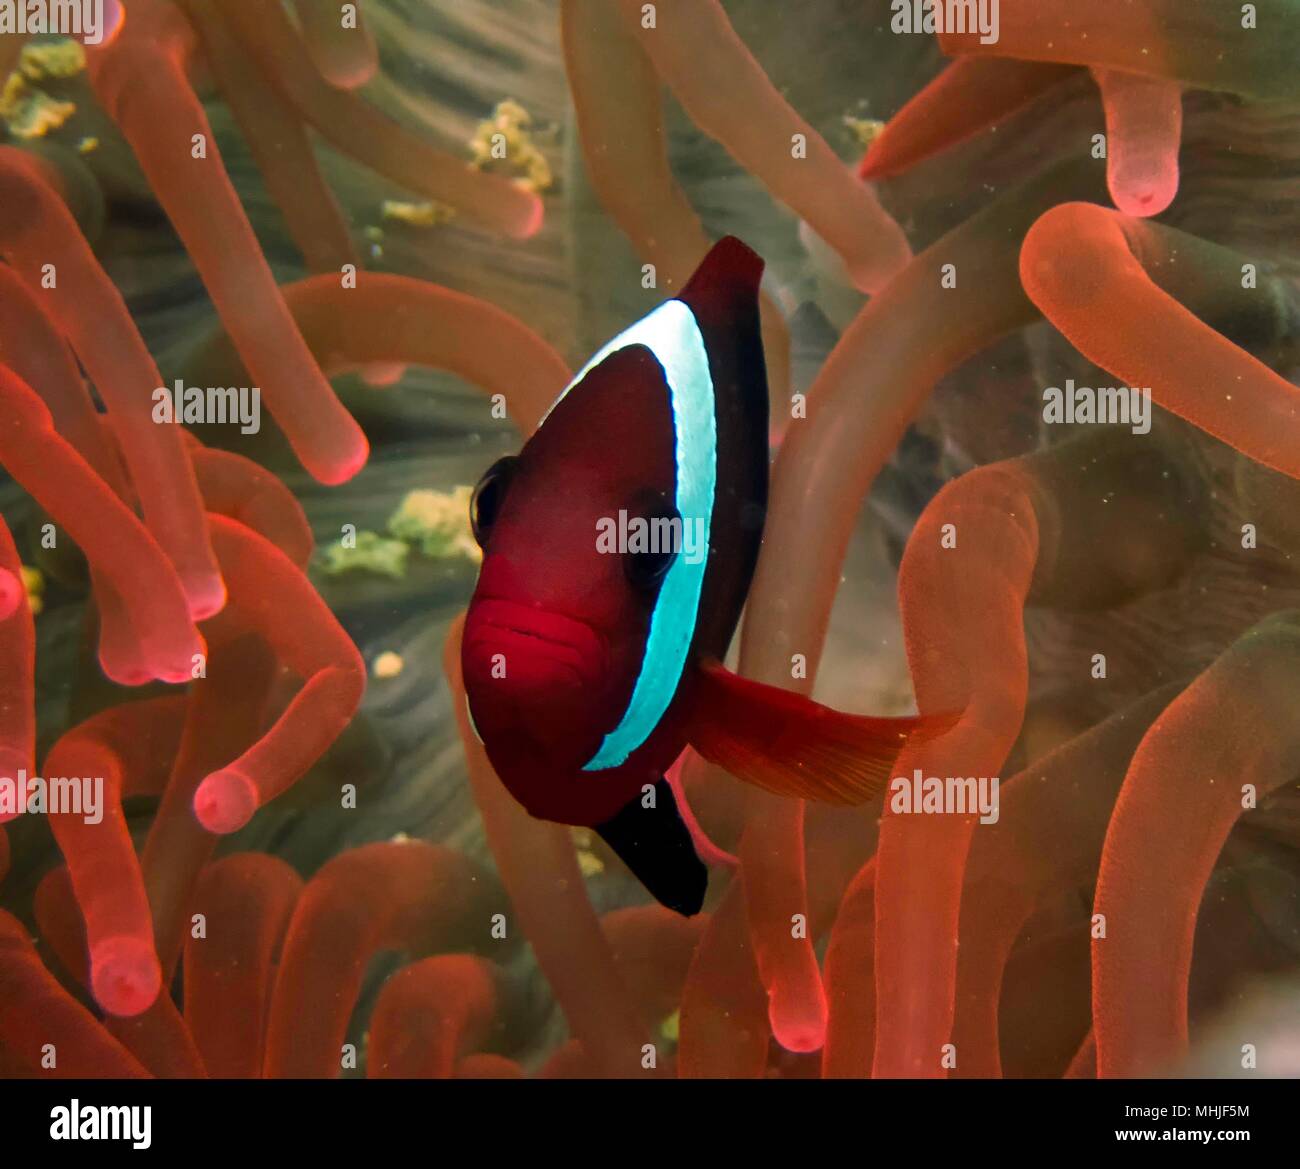 A Tomato Clown Fish (Amphiprion frenatus) swimming in a red anemone in the Pacific Ocean. Stock Photo